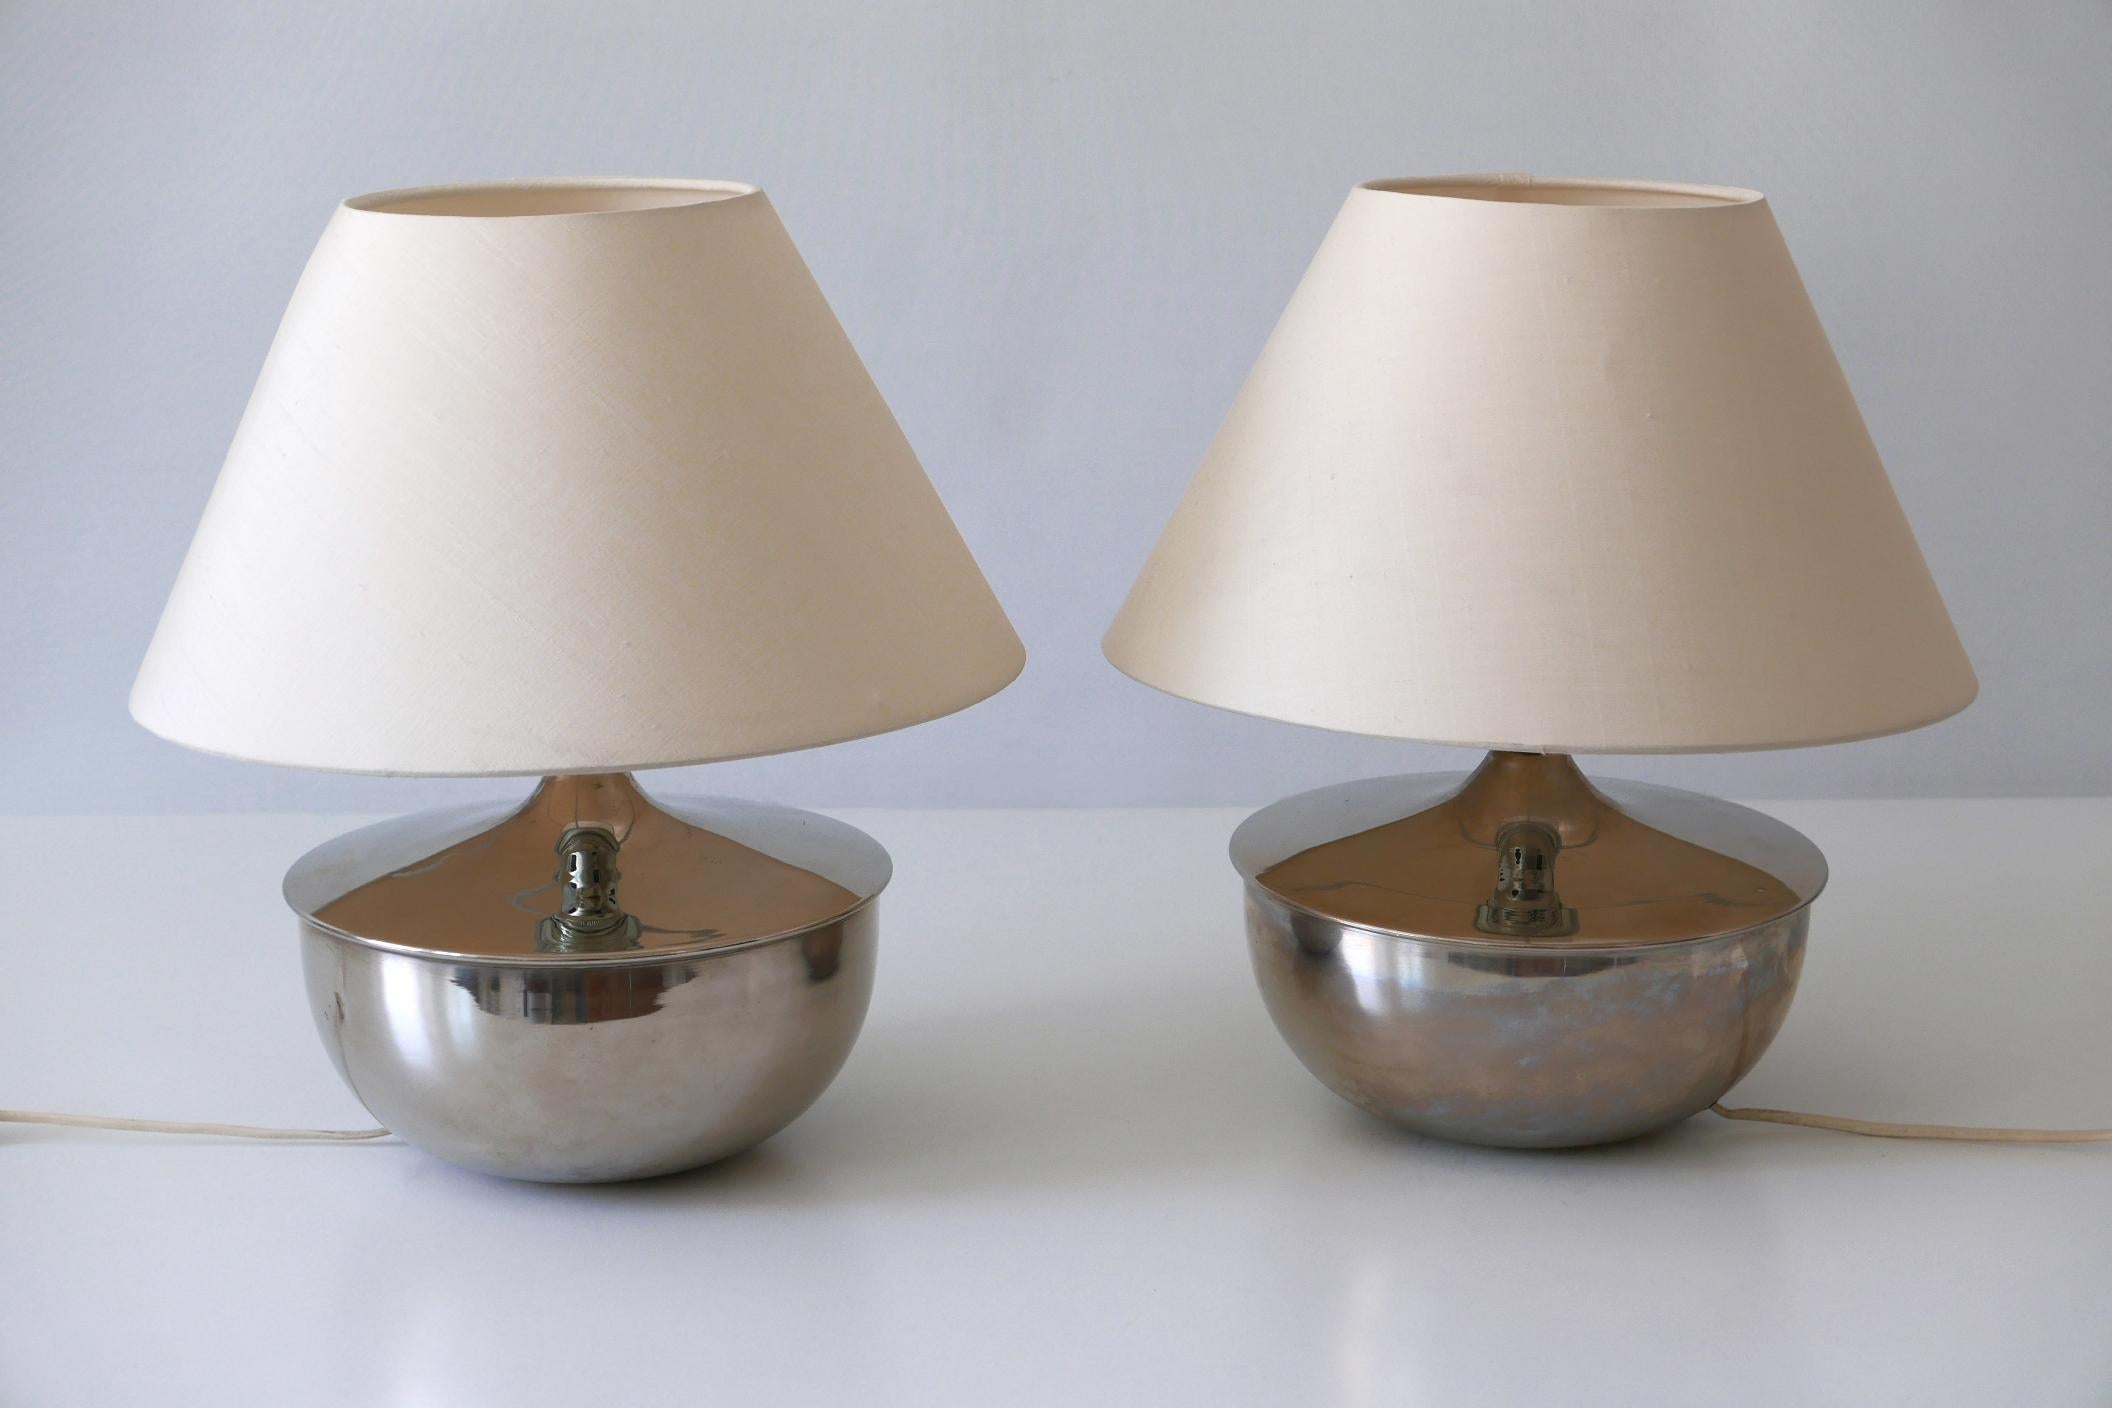 Set of Two Elegant Mid-Century Modern Table Lamps 1970s Germany 1